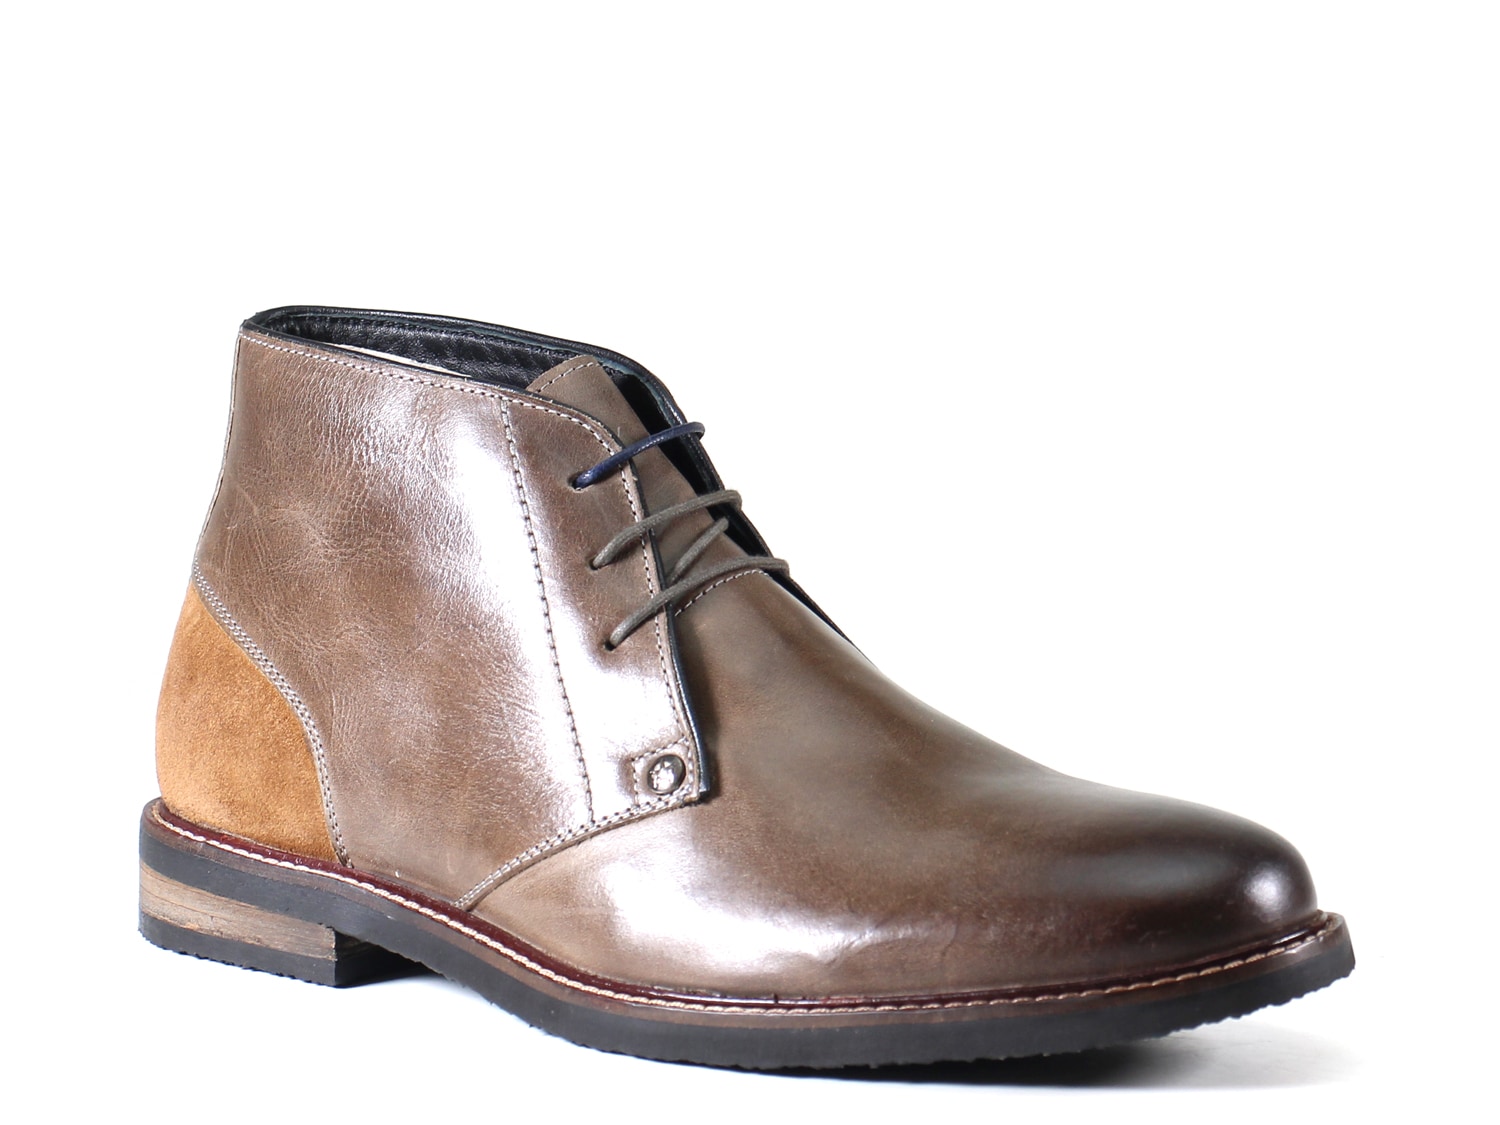 Rustic Asphalt Ask For More Leather Chukka Boot - Free Shipping | DSW